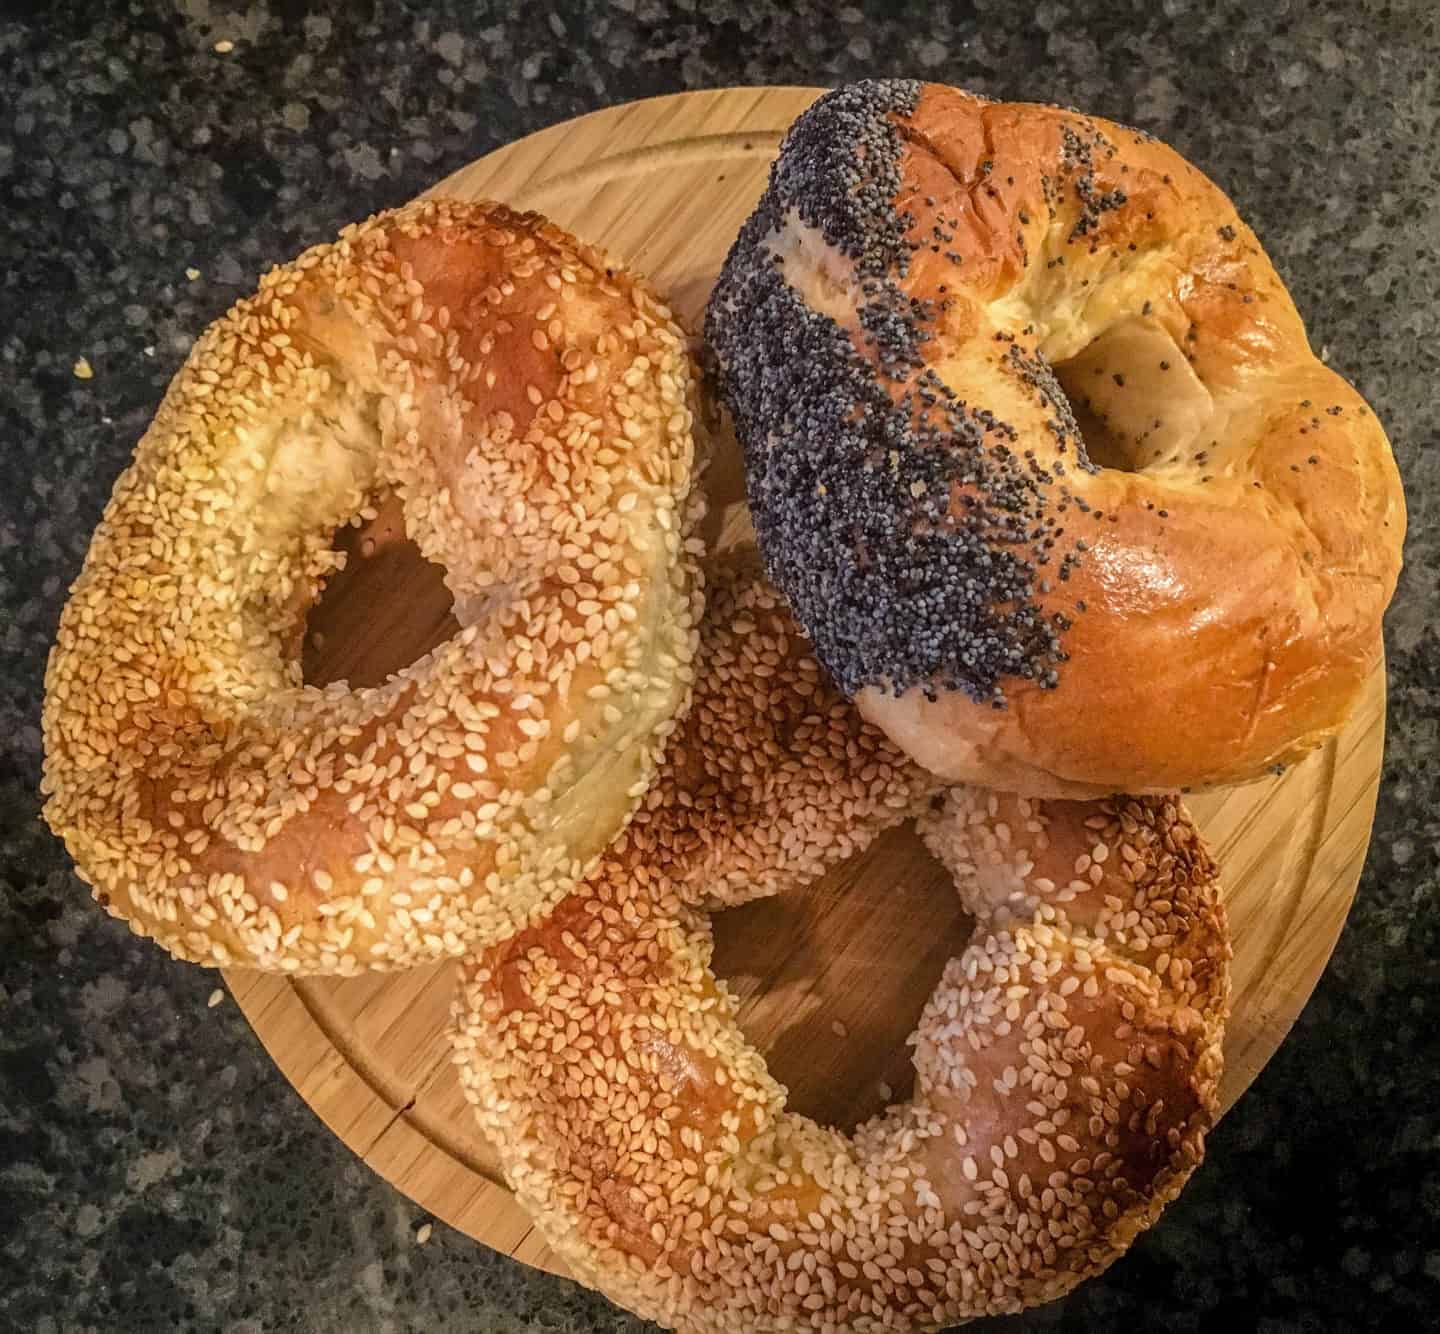 Montreal Bagels is one of the Canadian foods you have to try